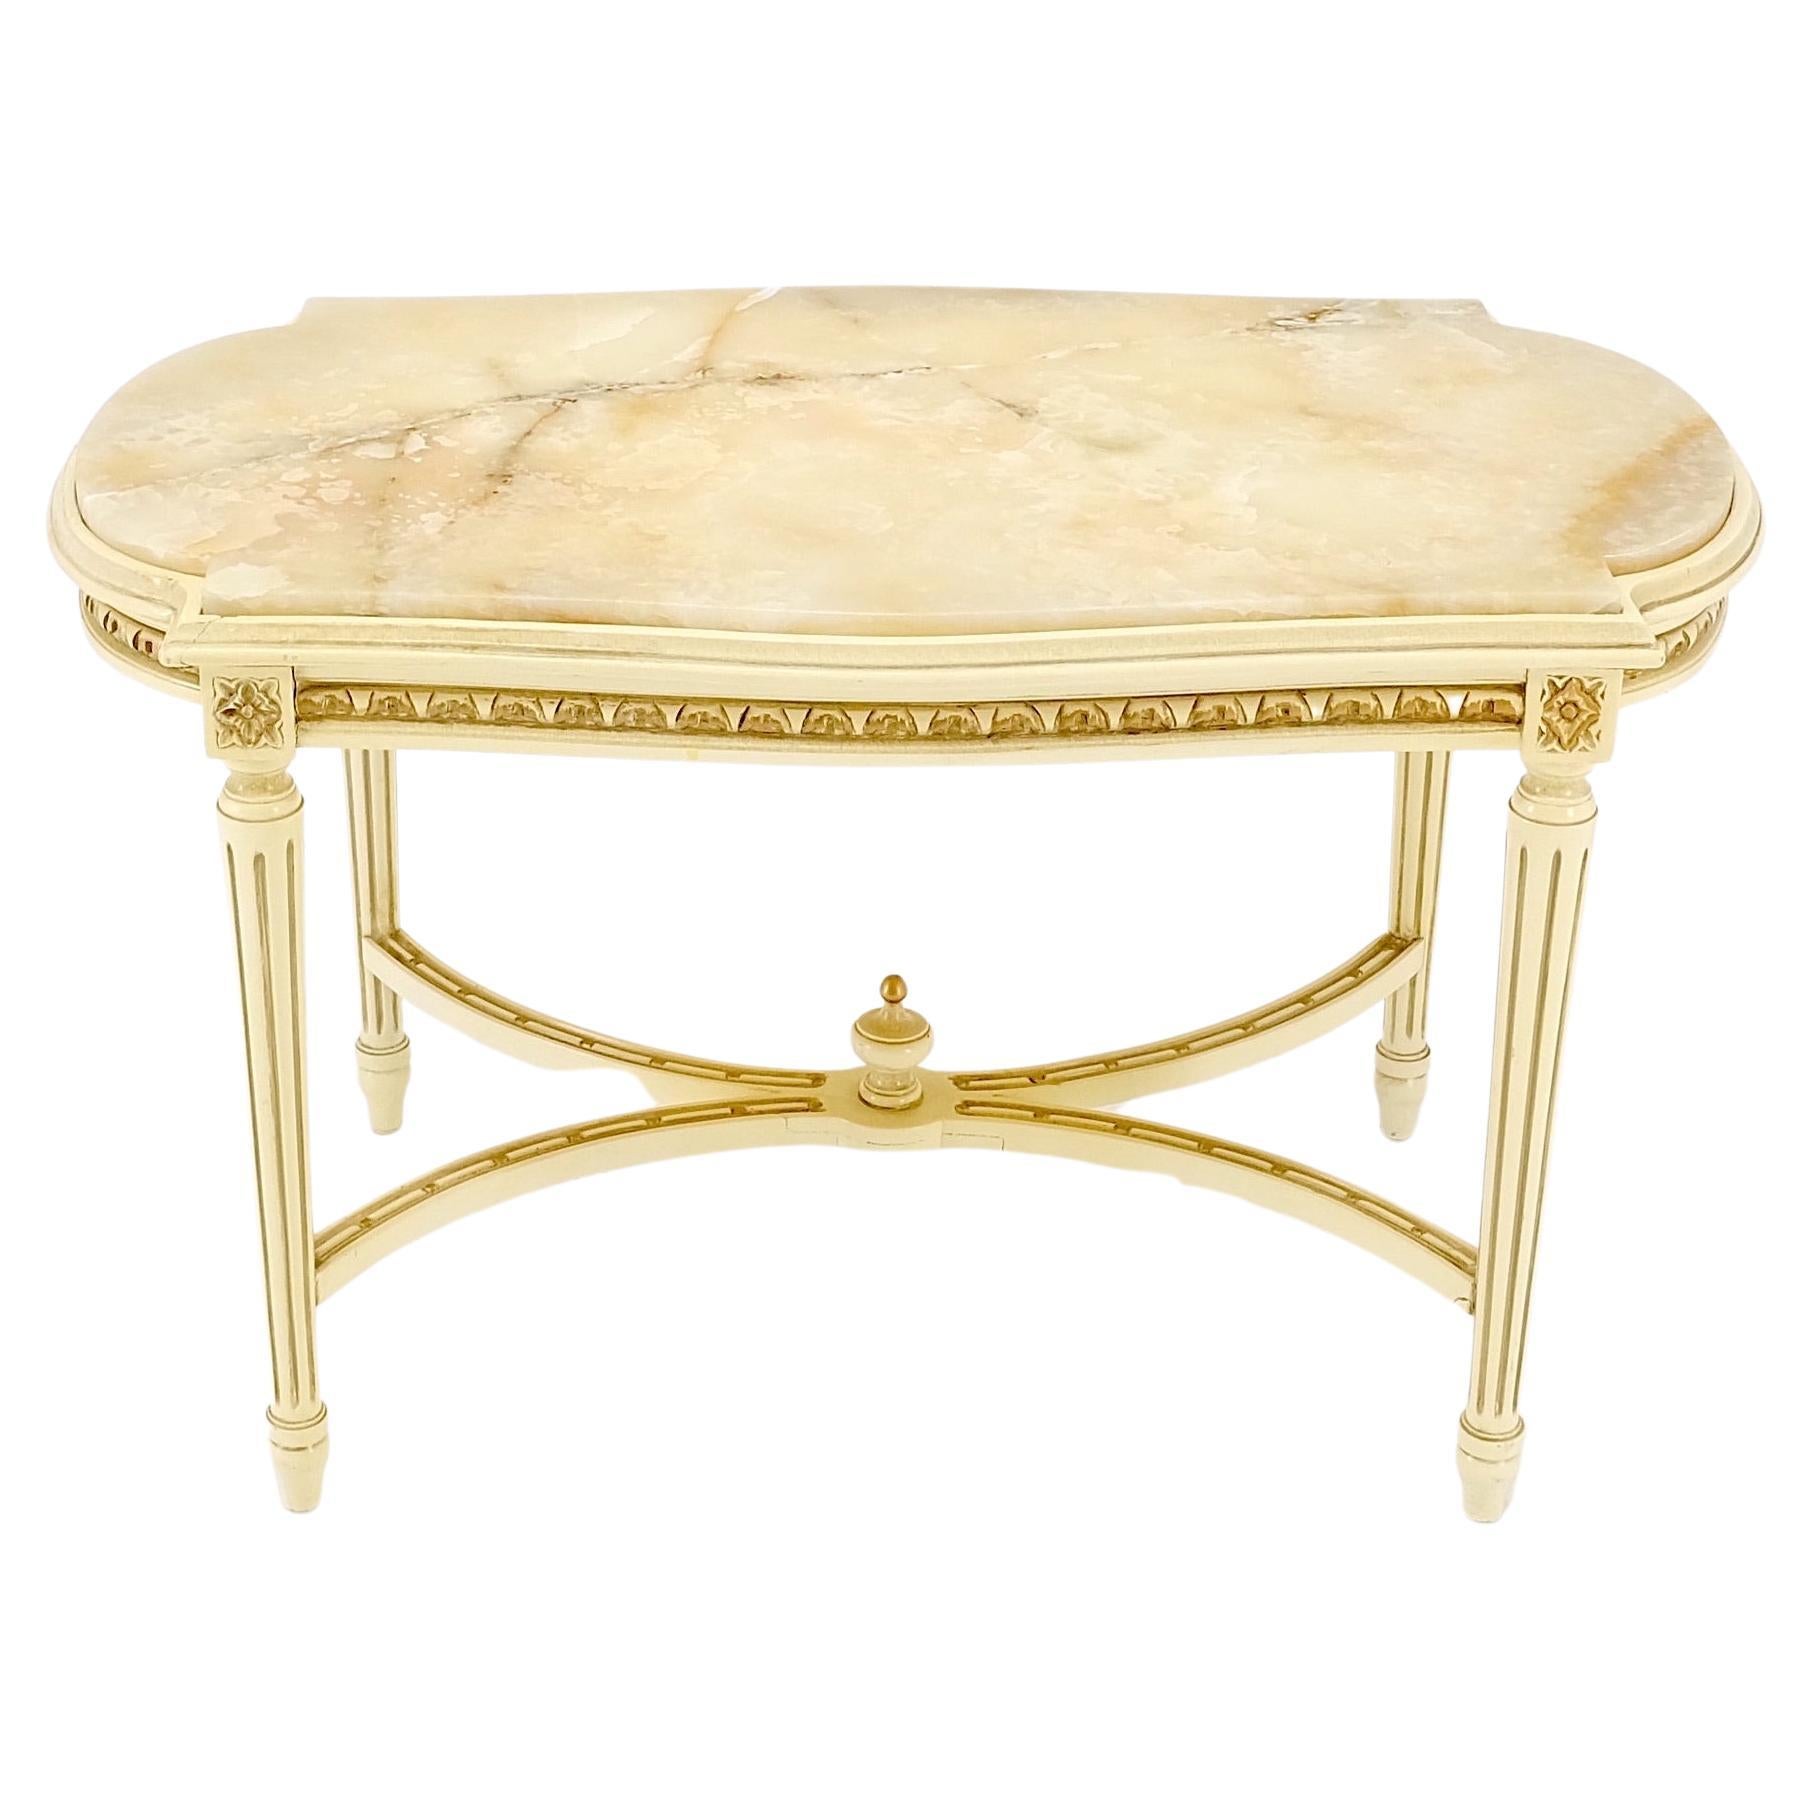 White Onyx Top Stadium Shape Top Beige Lacquer Carved Stretcher Base Side Table